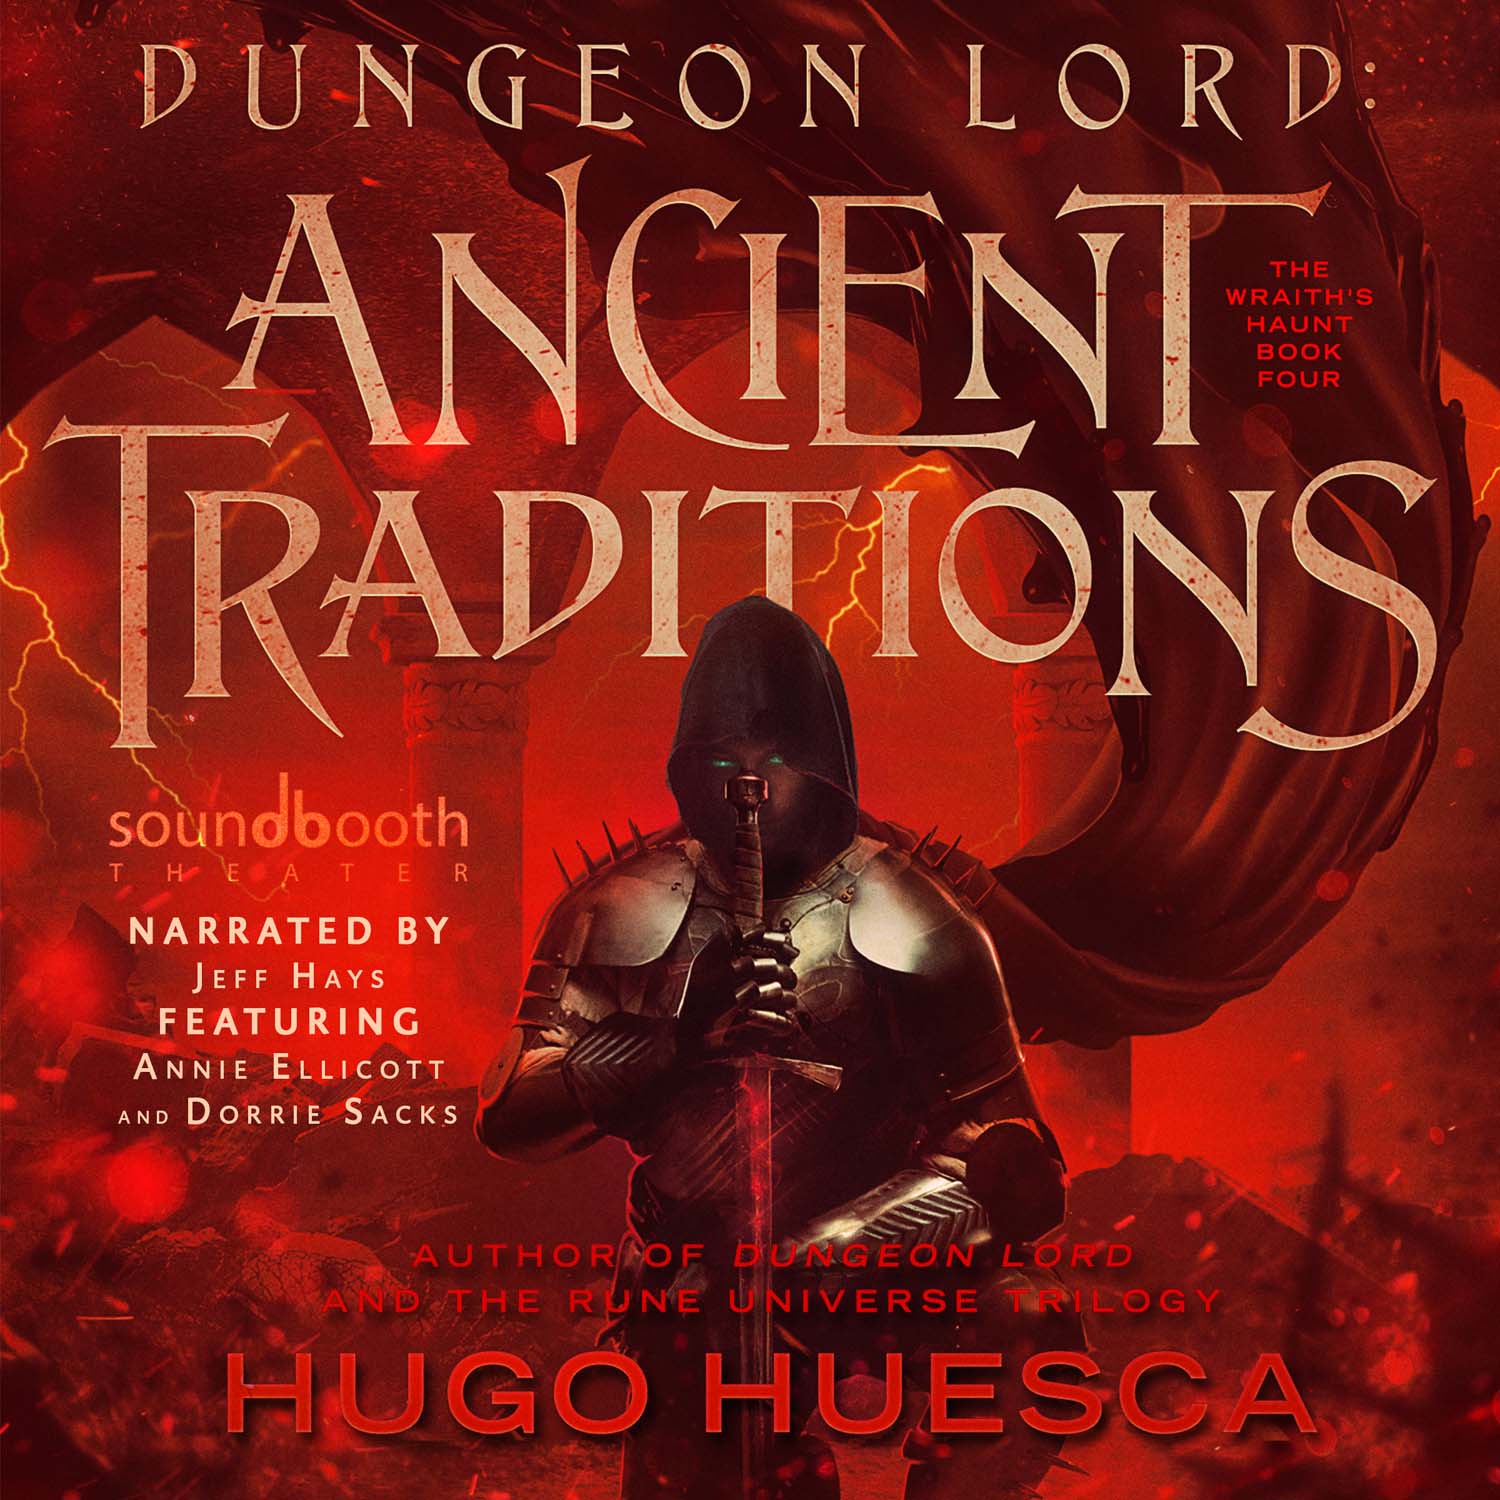 The Wraith's Haunt, Book 4: Dungeon Lord - Ancient Traditions